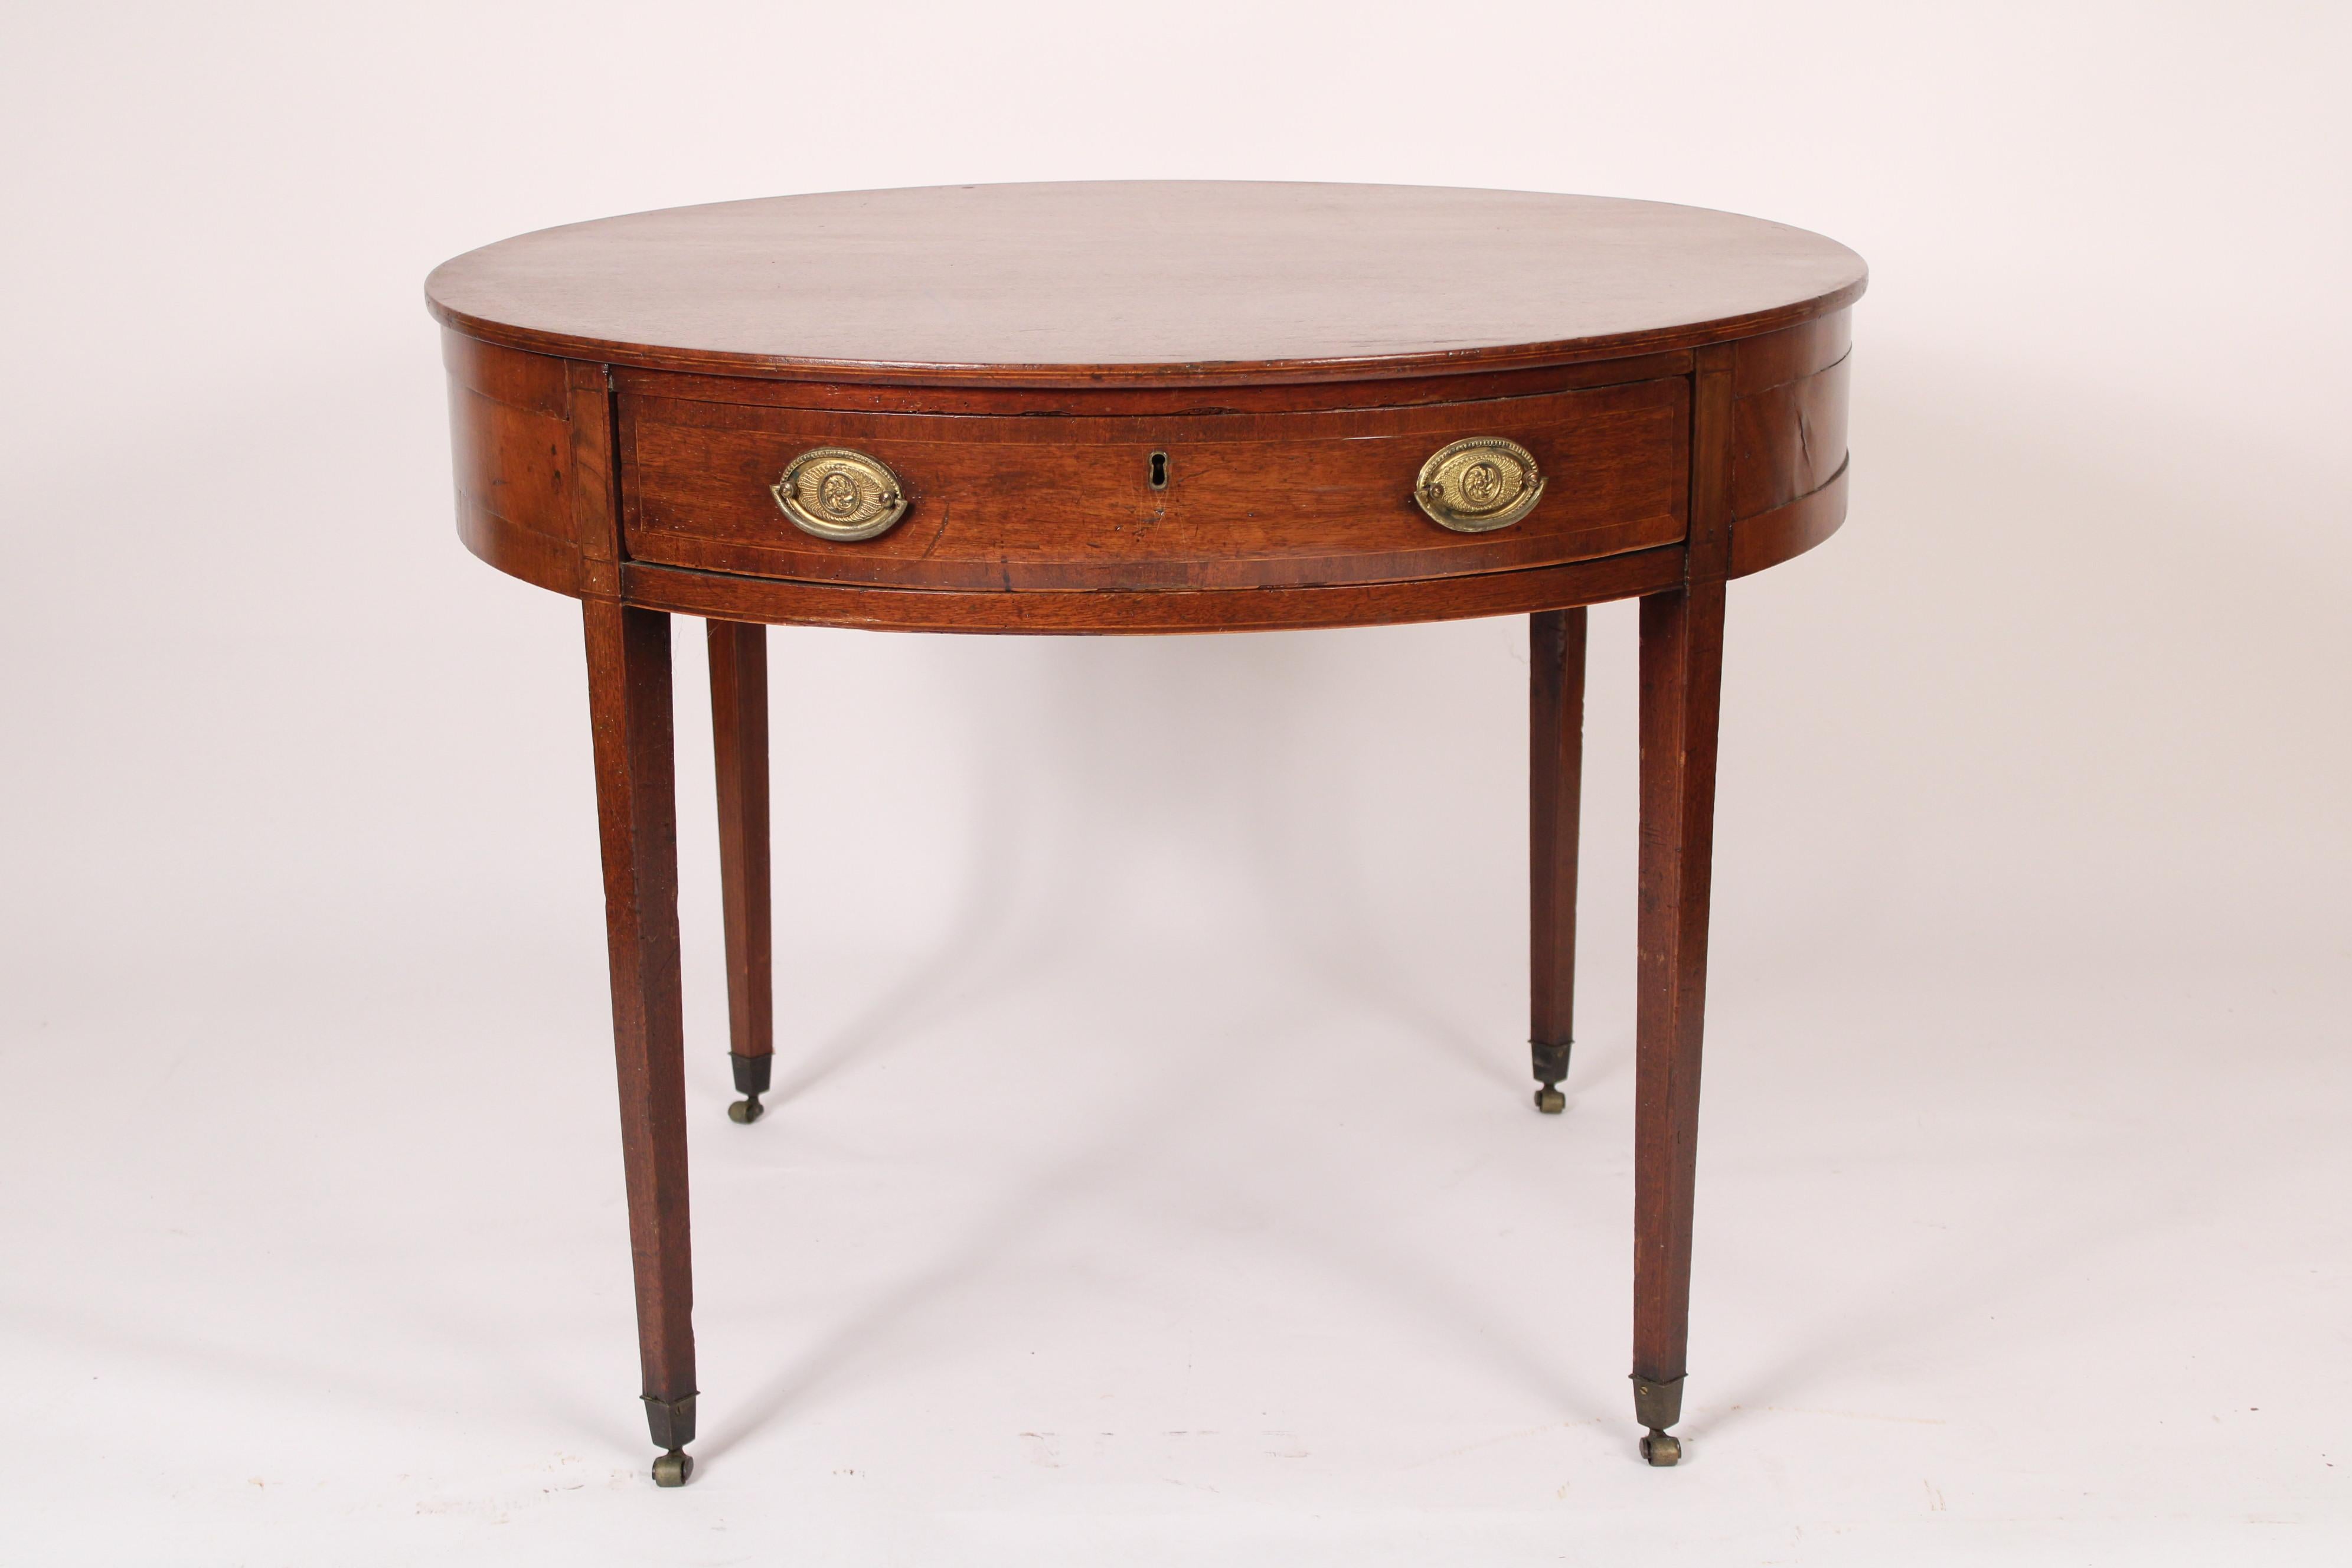 Antique George III style mahogany games / center / side table, 19th century. With a circular top, a frieze with one drawer with brass hardware, resting on square tapered legs ending in brass casters. Hand dove tailed drawer construction.